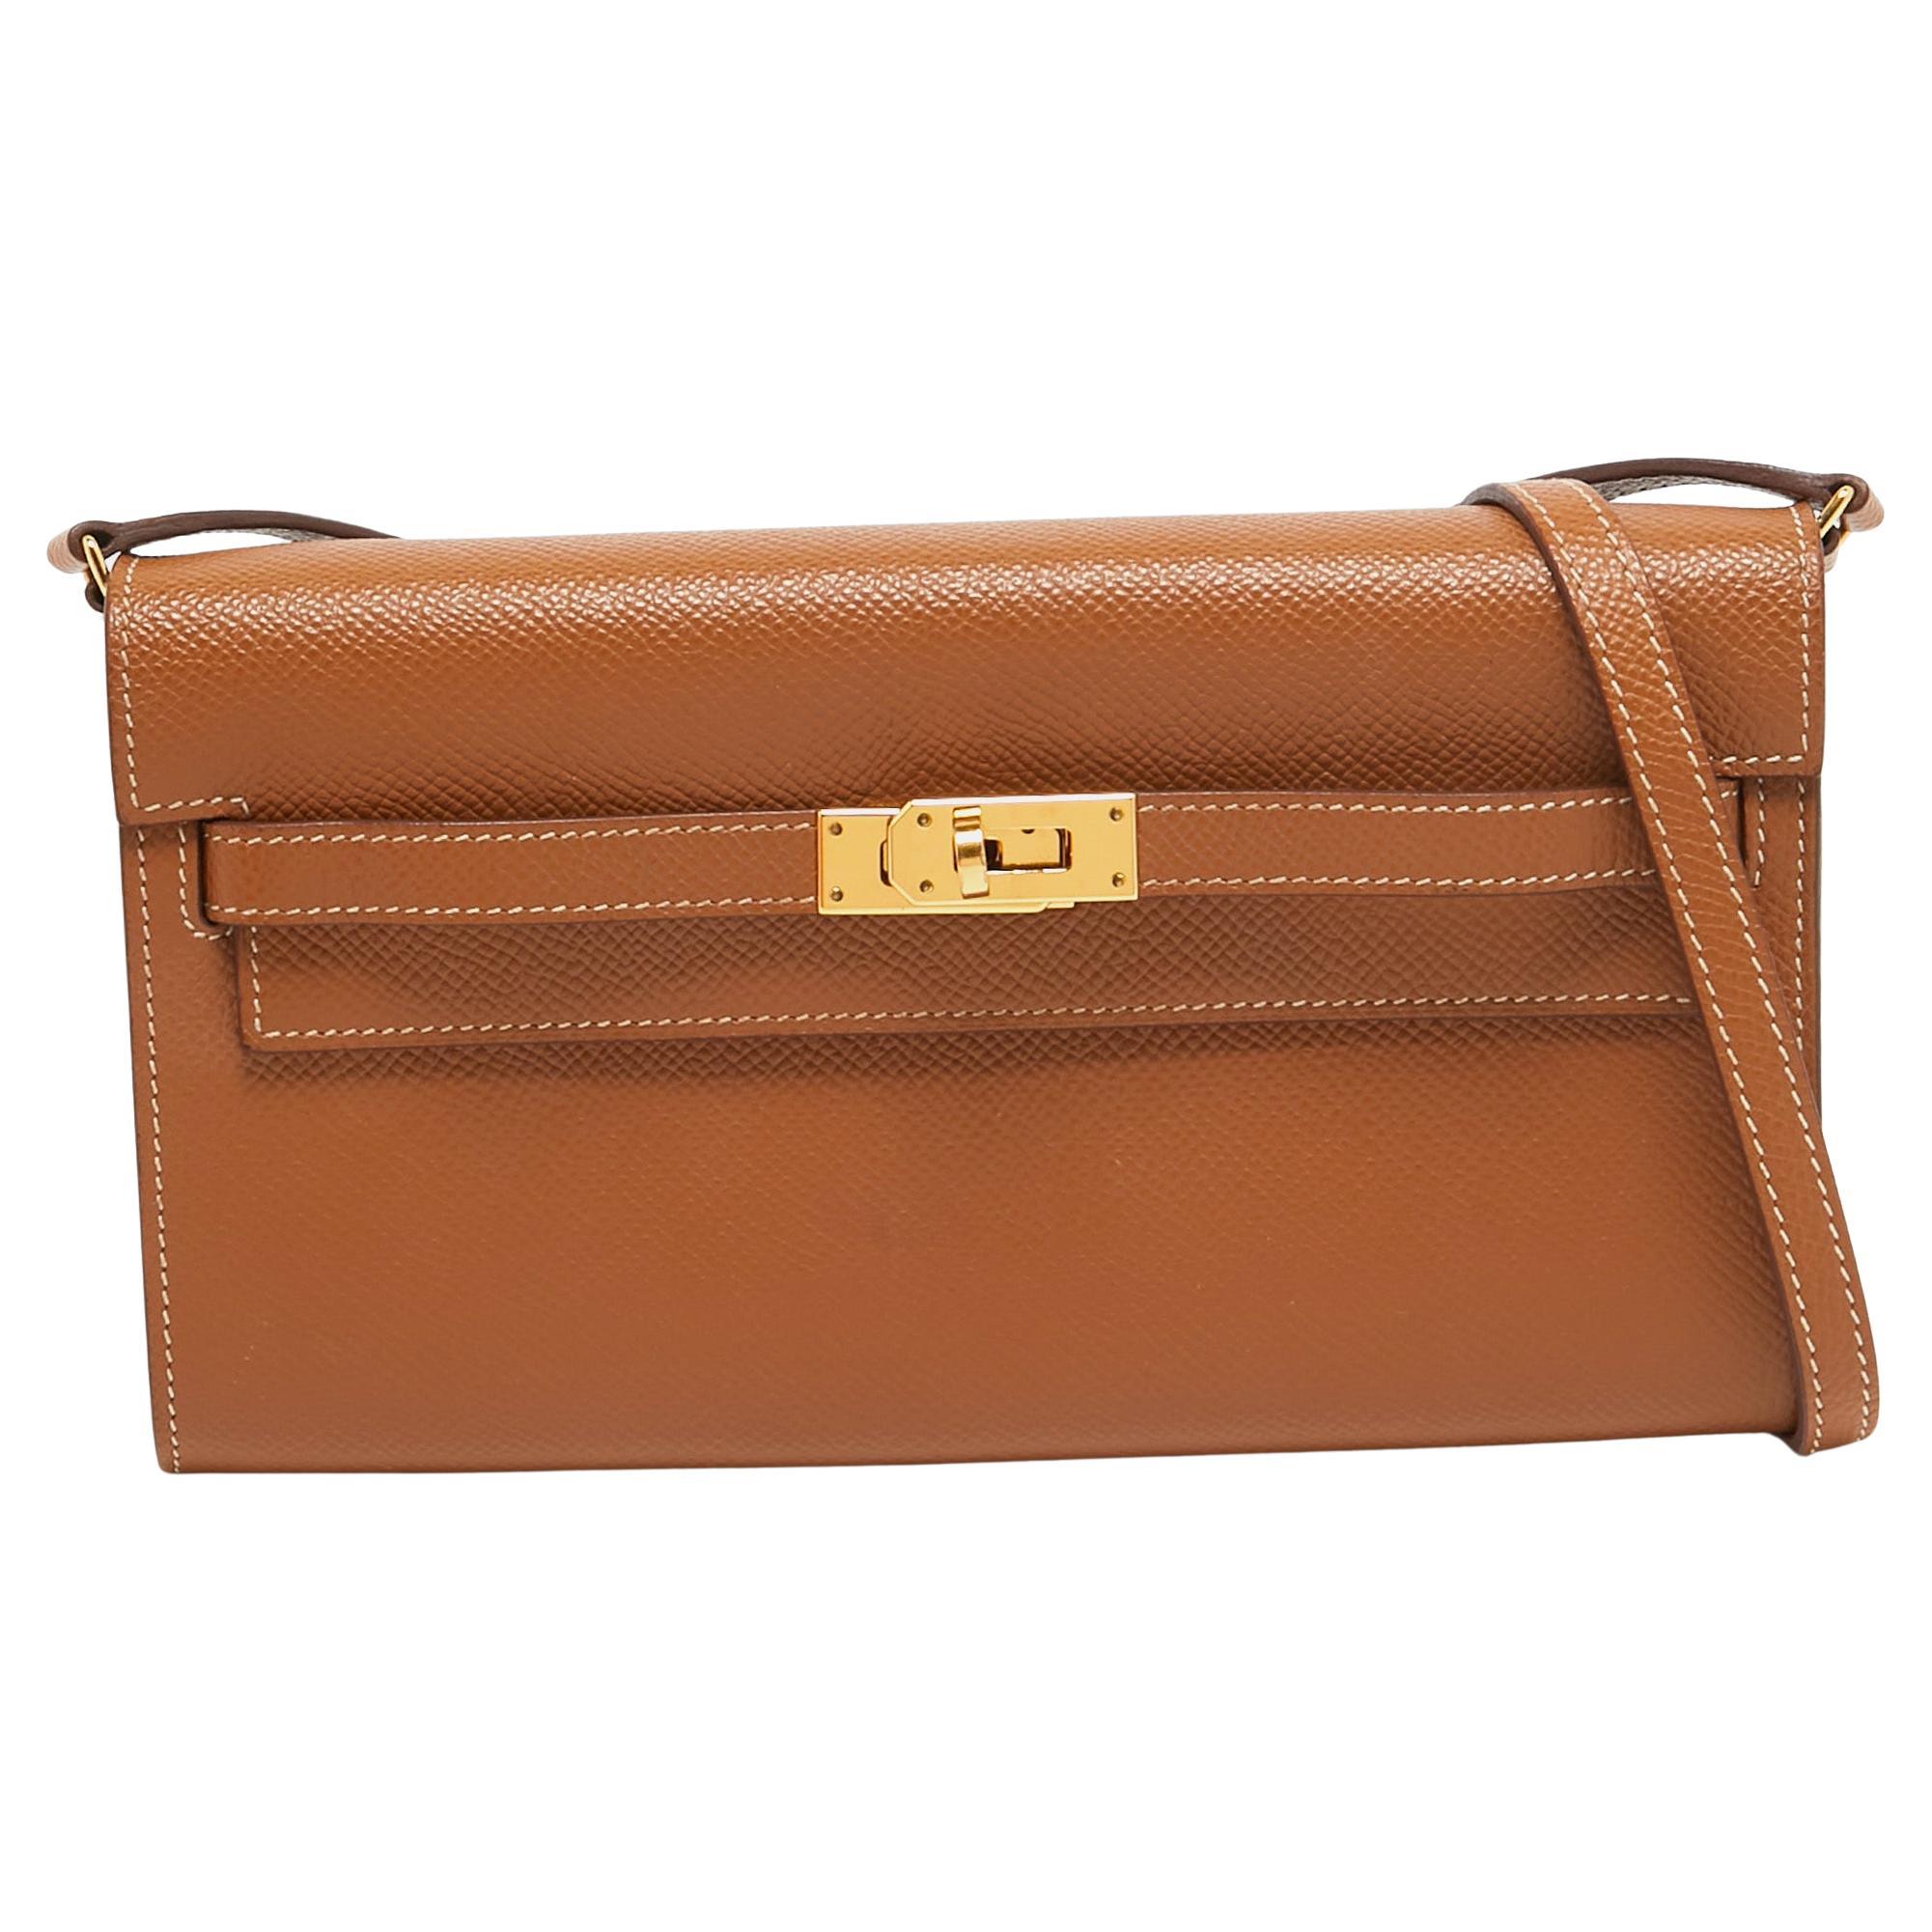 Hermes Gold Epsom Leather Kelly To Go Wallet